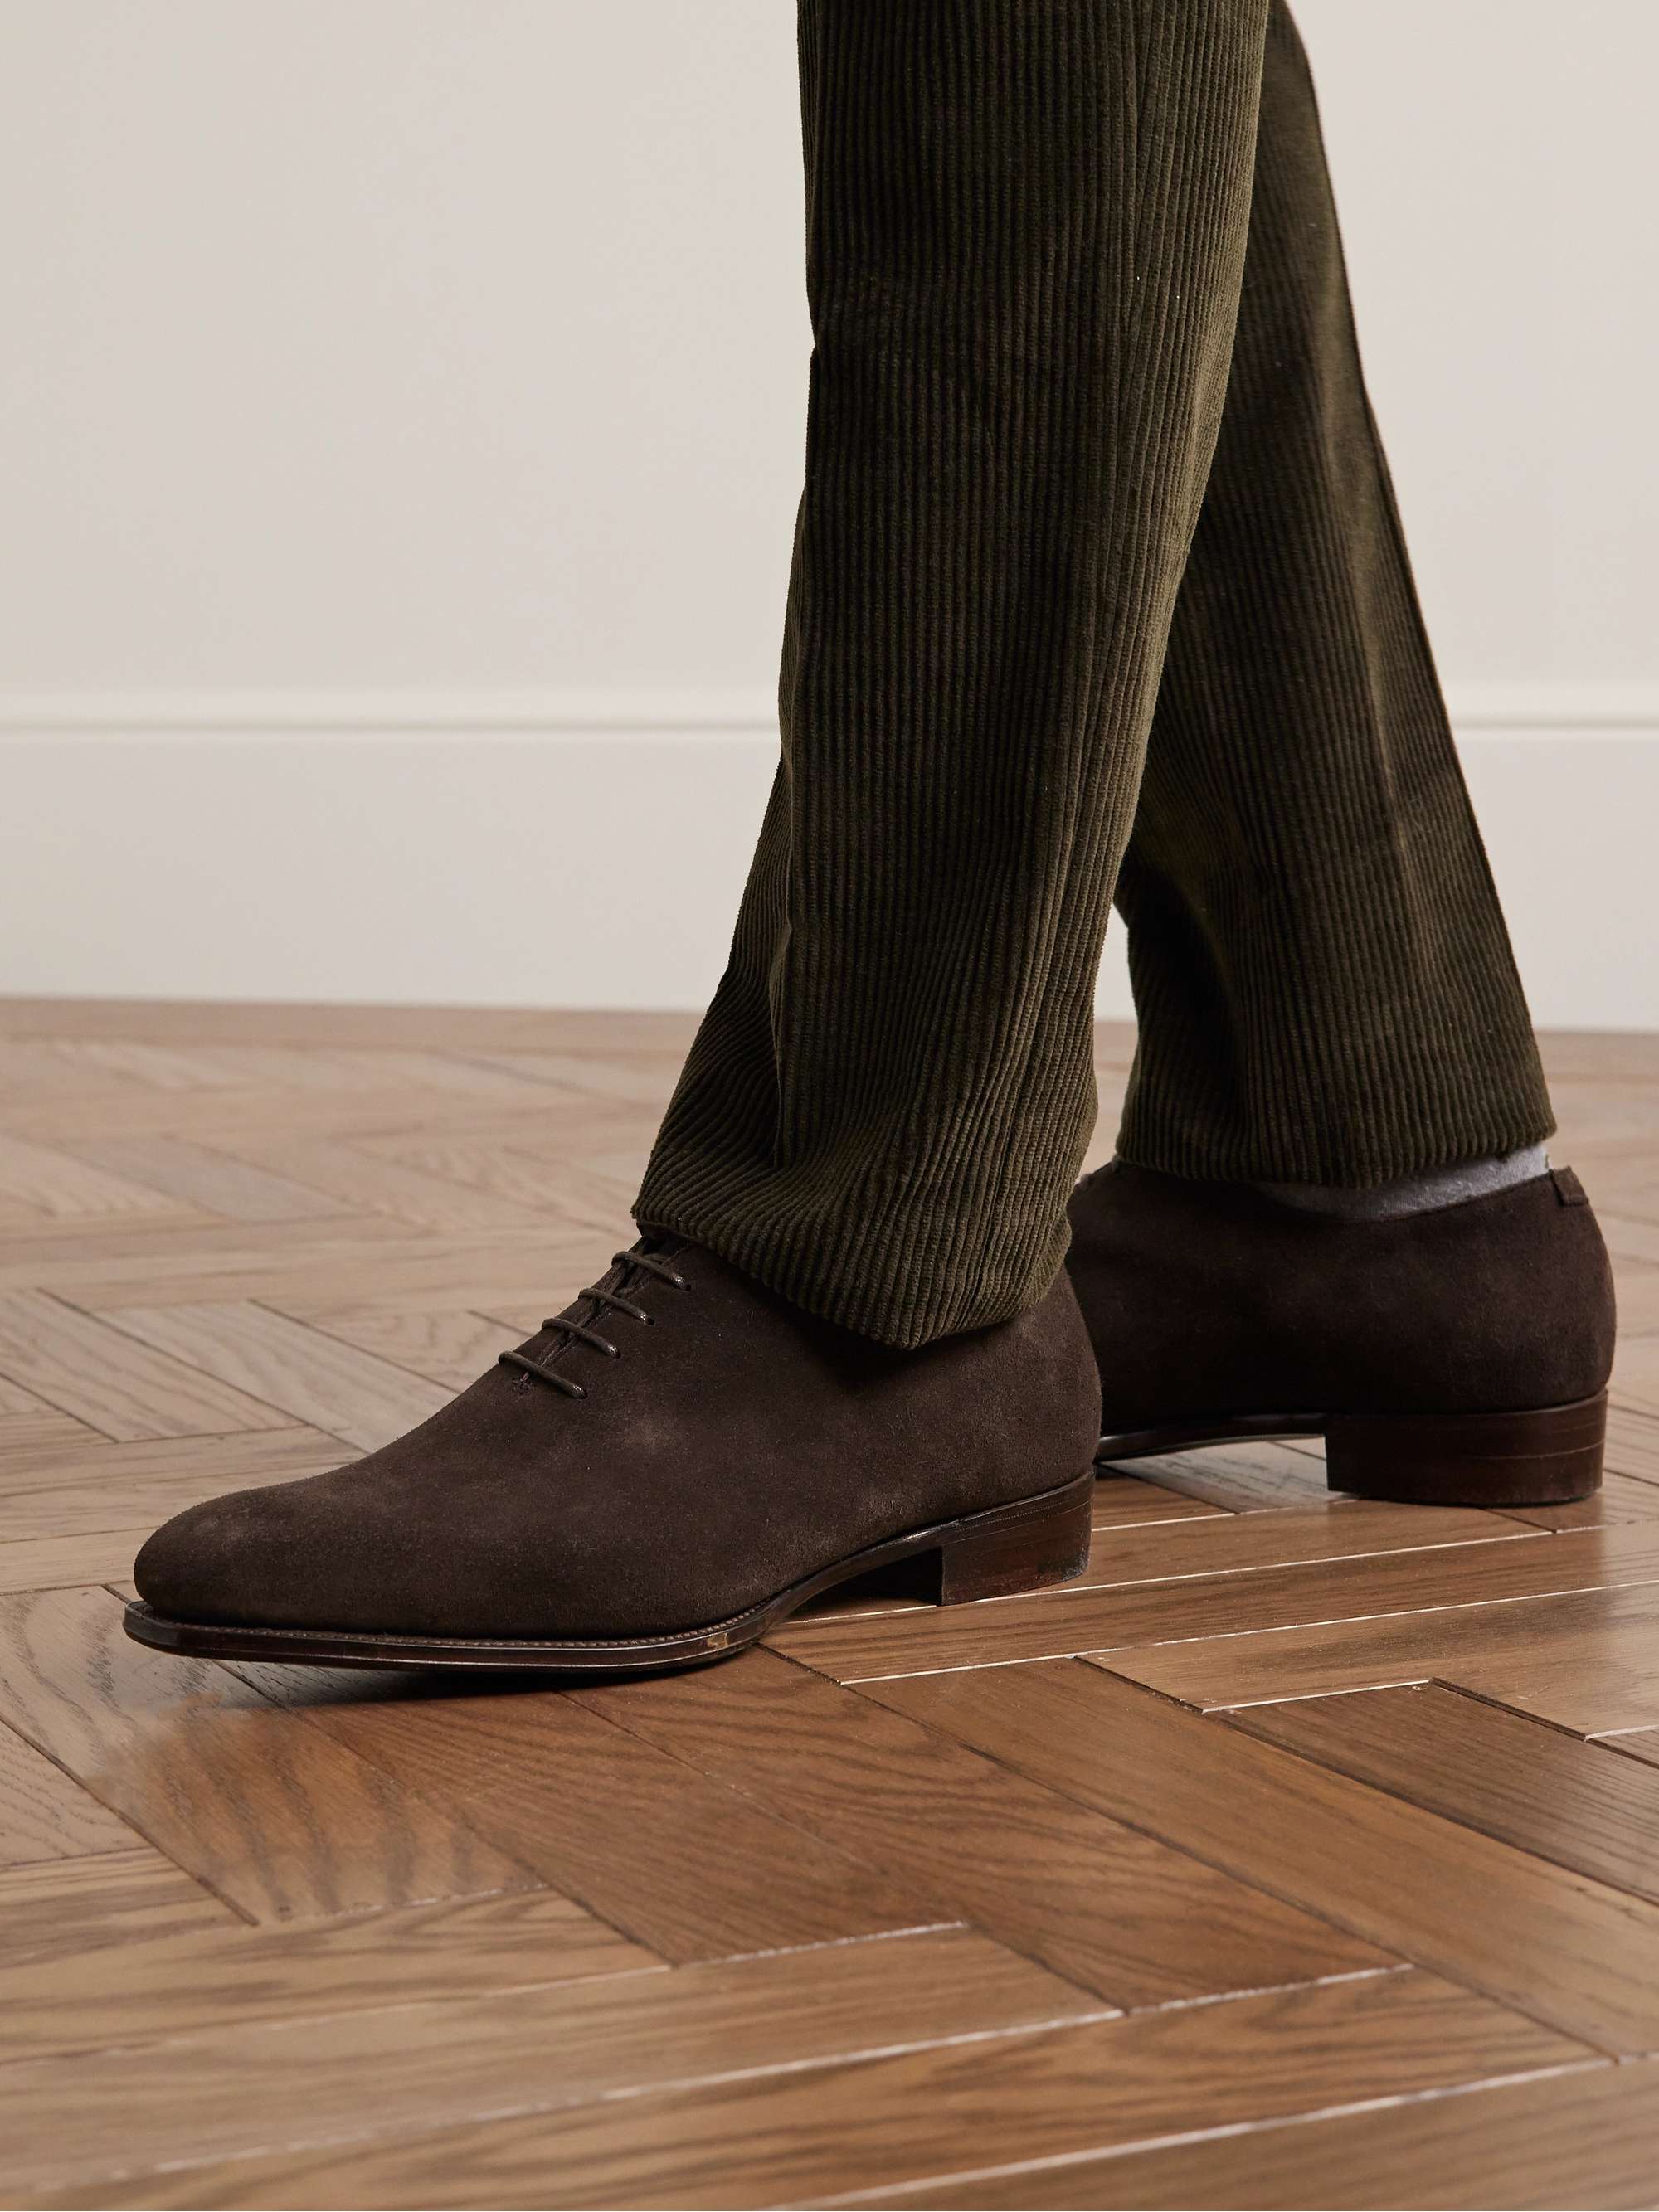 GEORGE CLEVERLEY Merlin Whole-Cut Suede Oxford Shoes